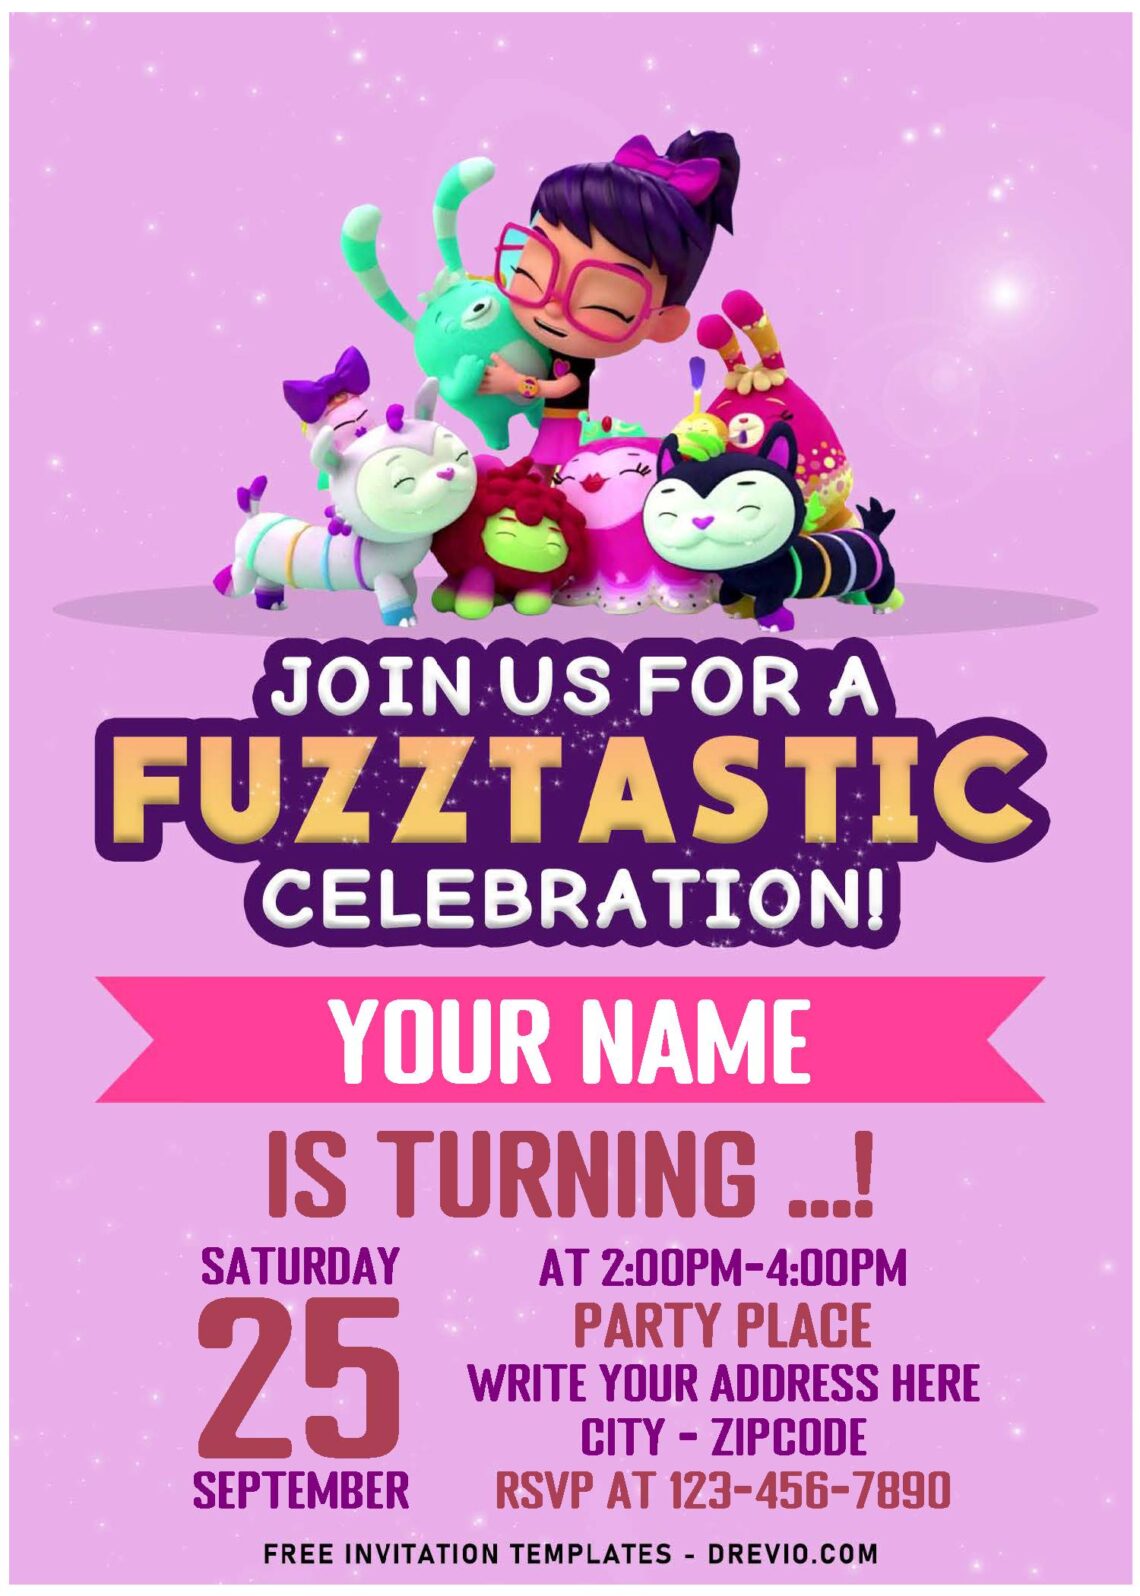 (Free Editable PDF) Fuzz-Tastic Abby Hatcher And Her Toy-Friends Birthday Invitation Templates with cute Bozzly